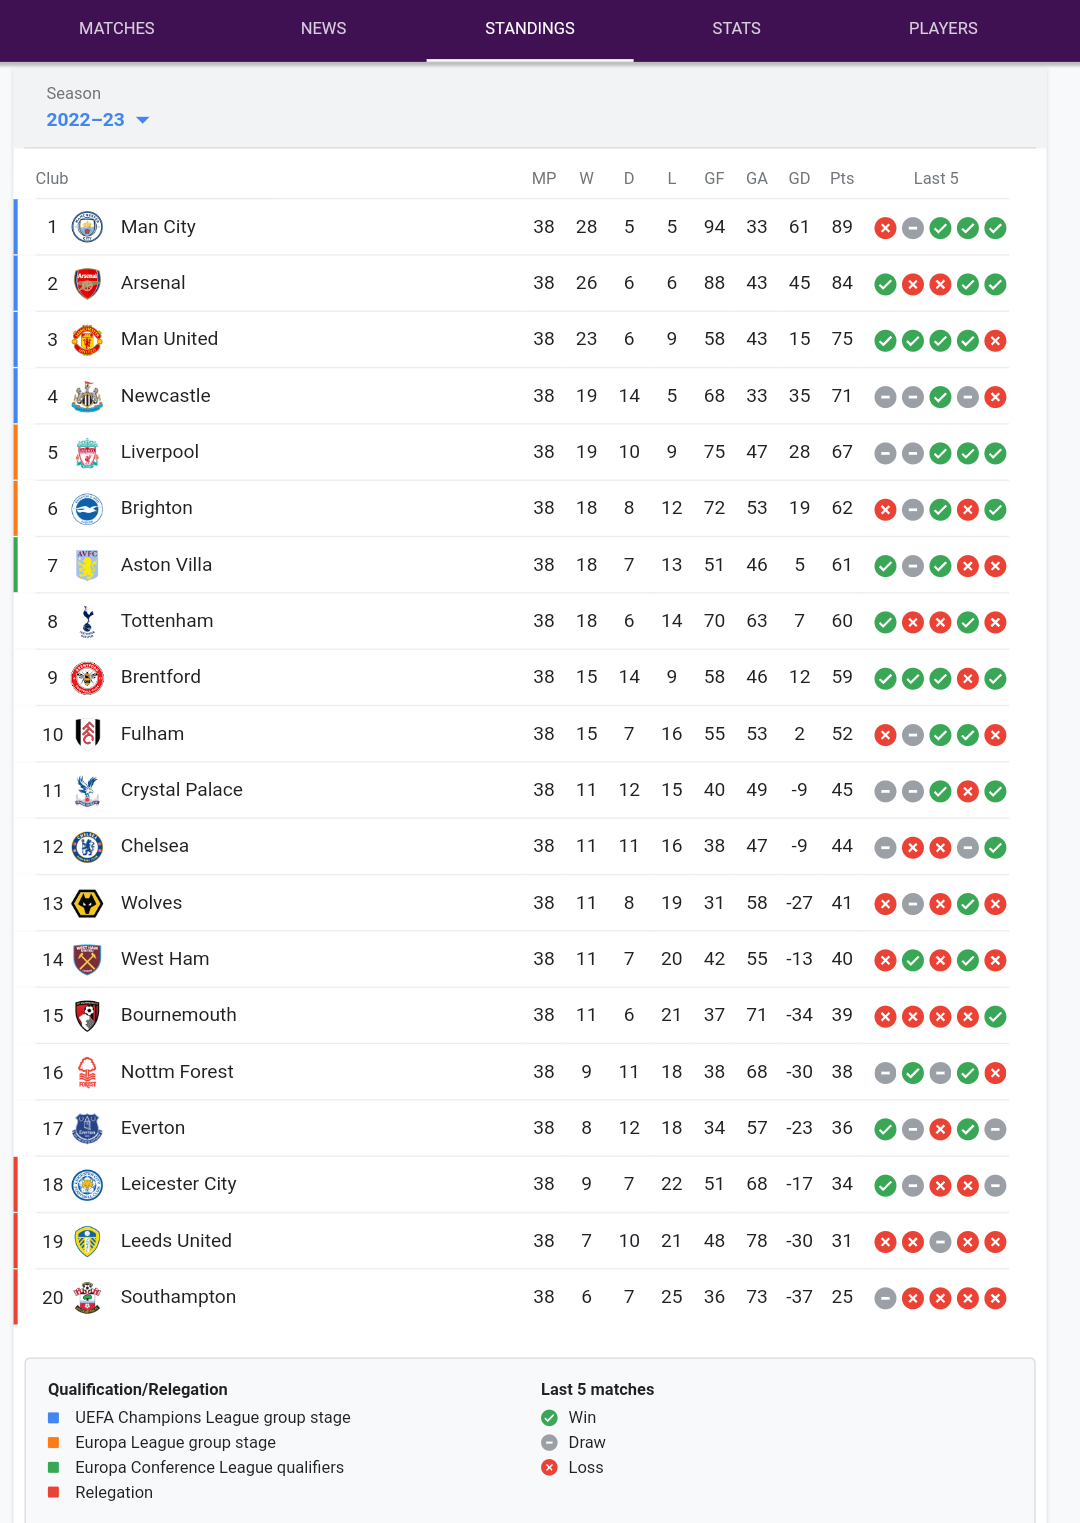 Everton survive while Leicester city and Leeds are relegated from Premier League